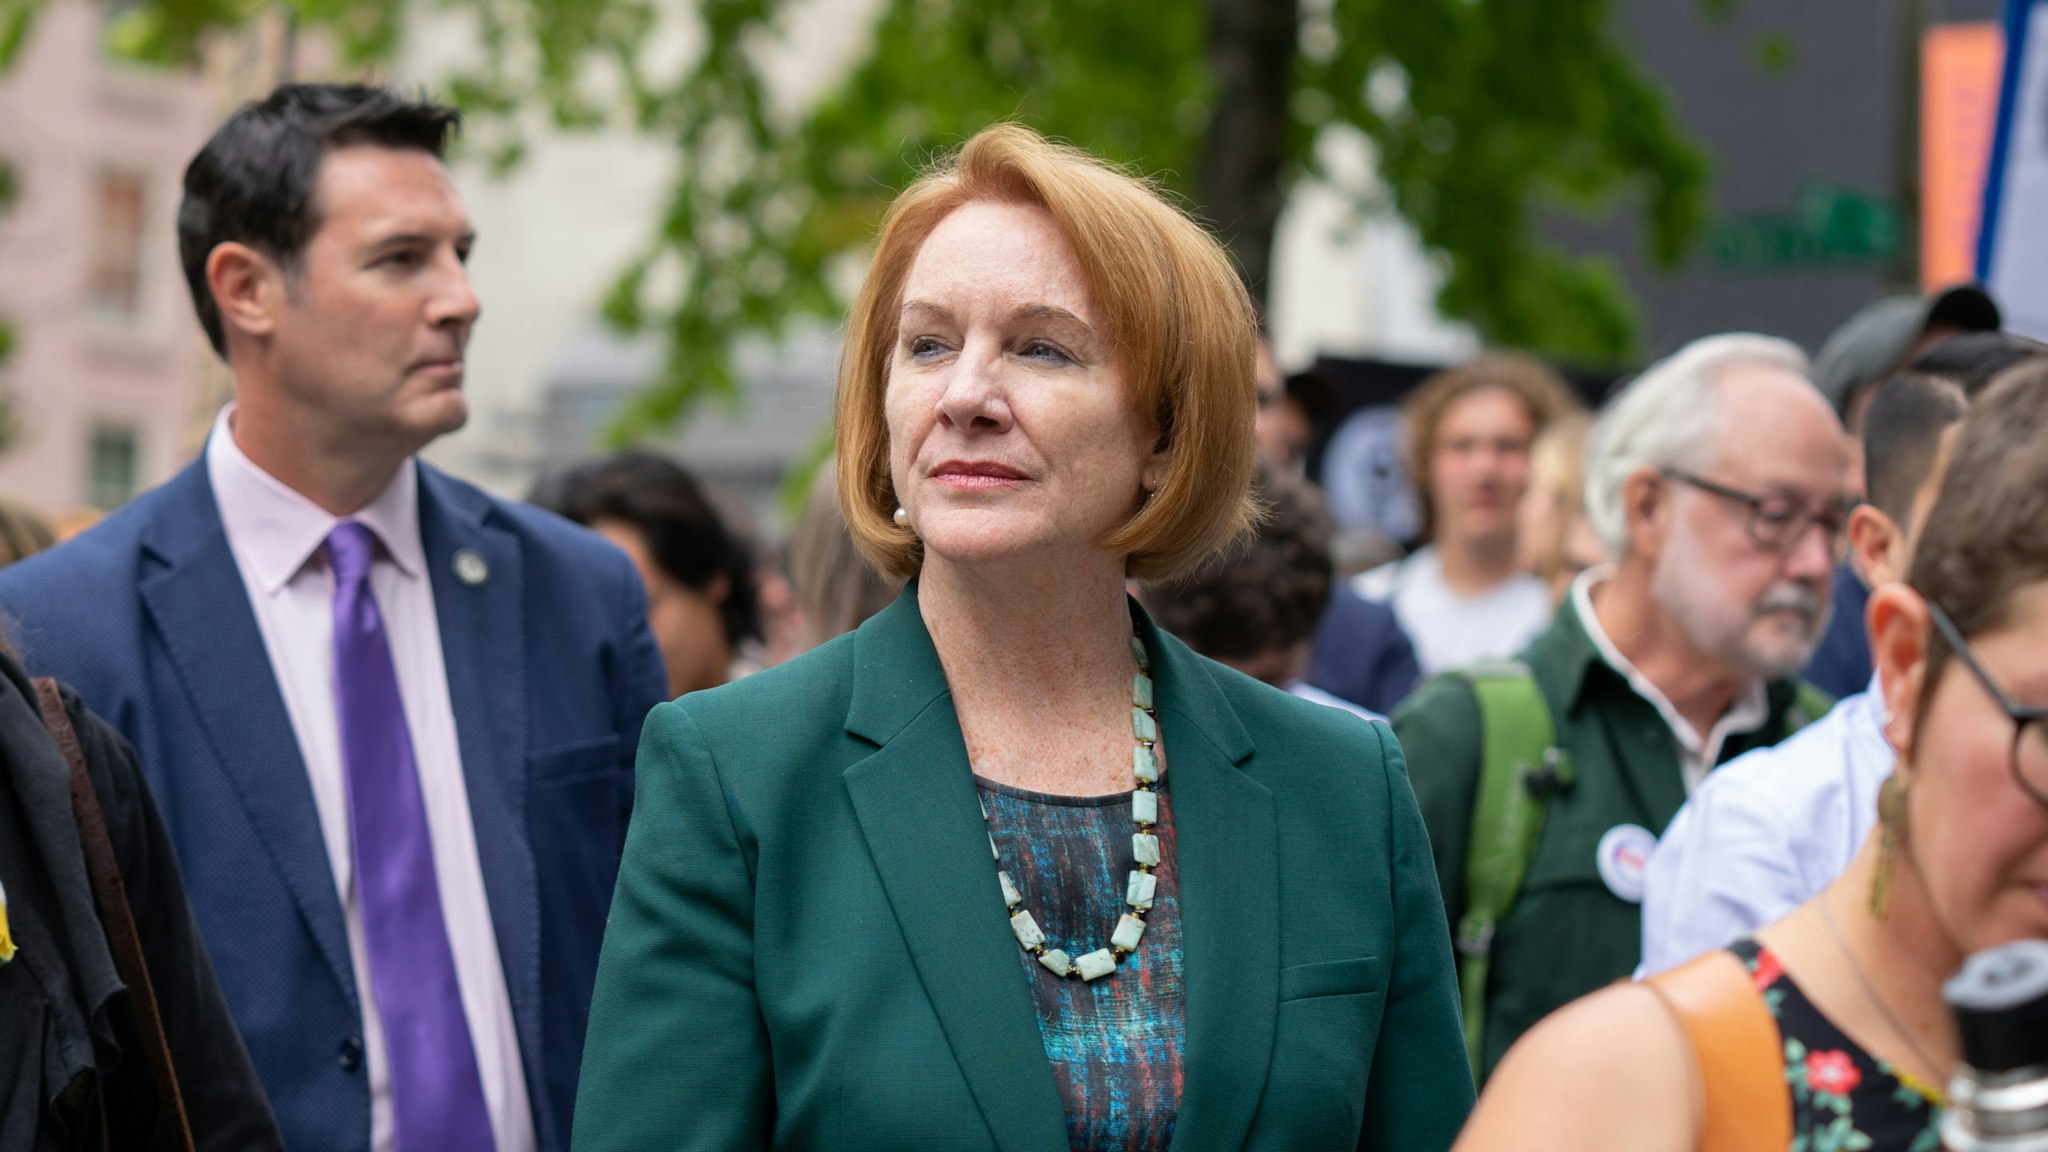 Jenny Durkan, mayor or Seattle, walks through the crowd at City Hall during the Global Climate Strike in Seattle, Washington, U.S., on Friday, Sept. 20, 2019. Thousands of workers at Microsoft Corp. and Amazon.com Inc. walked out without their bosses blessings to protest rising global temperatures. Photographer: Chloe Collyer/Bloomberg via Getty Images